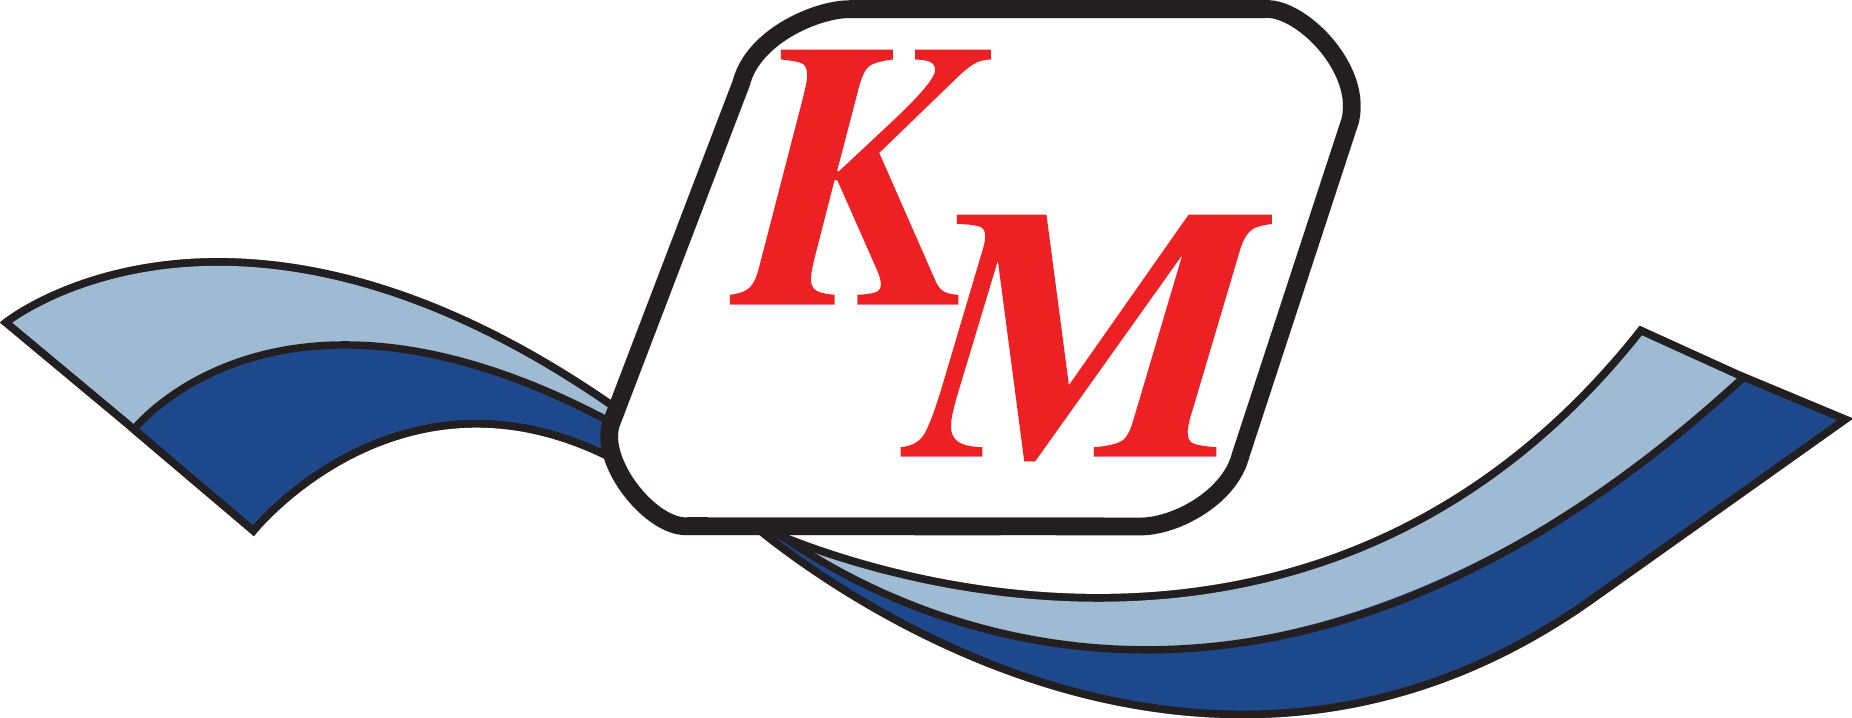 KM Specialty Pumps & Systems